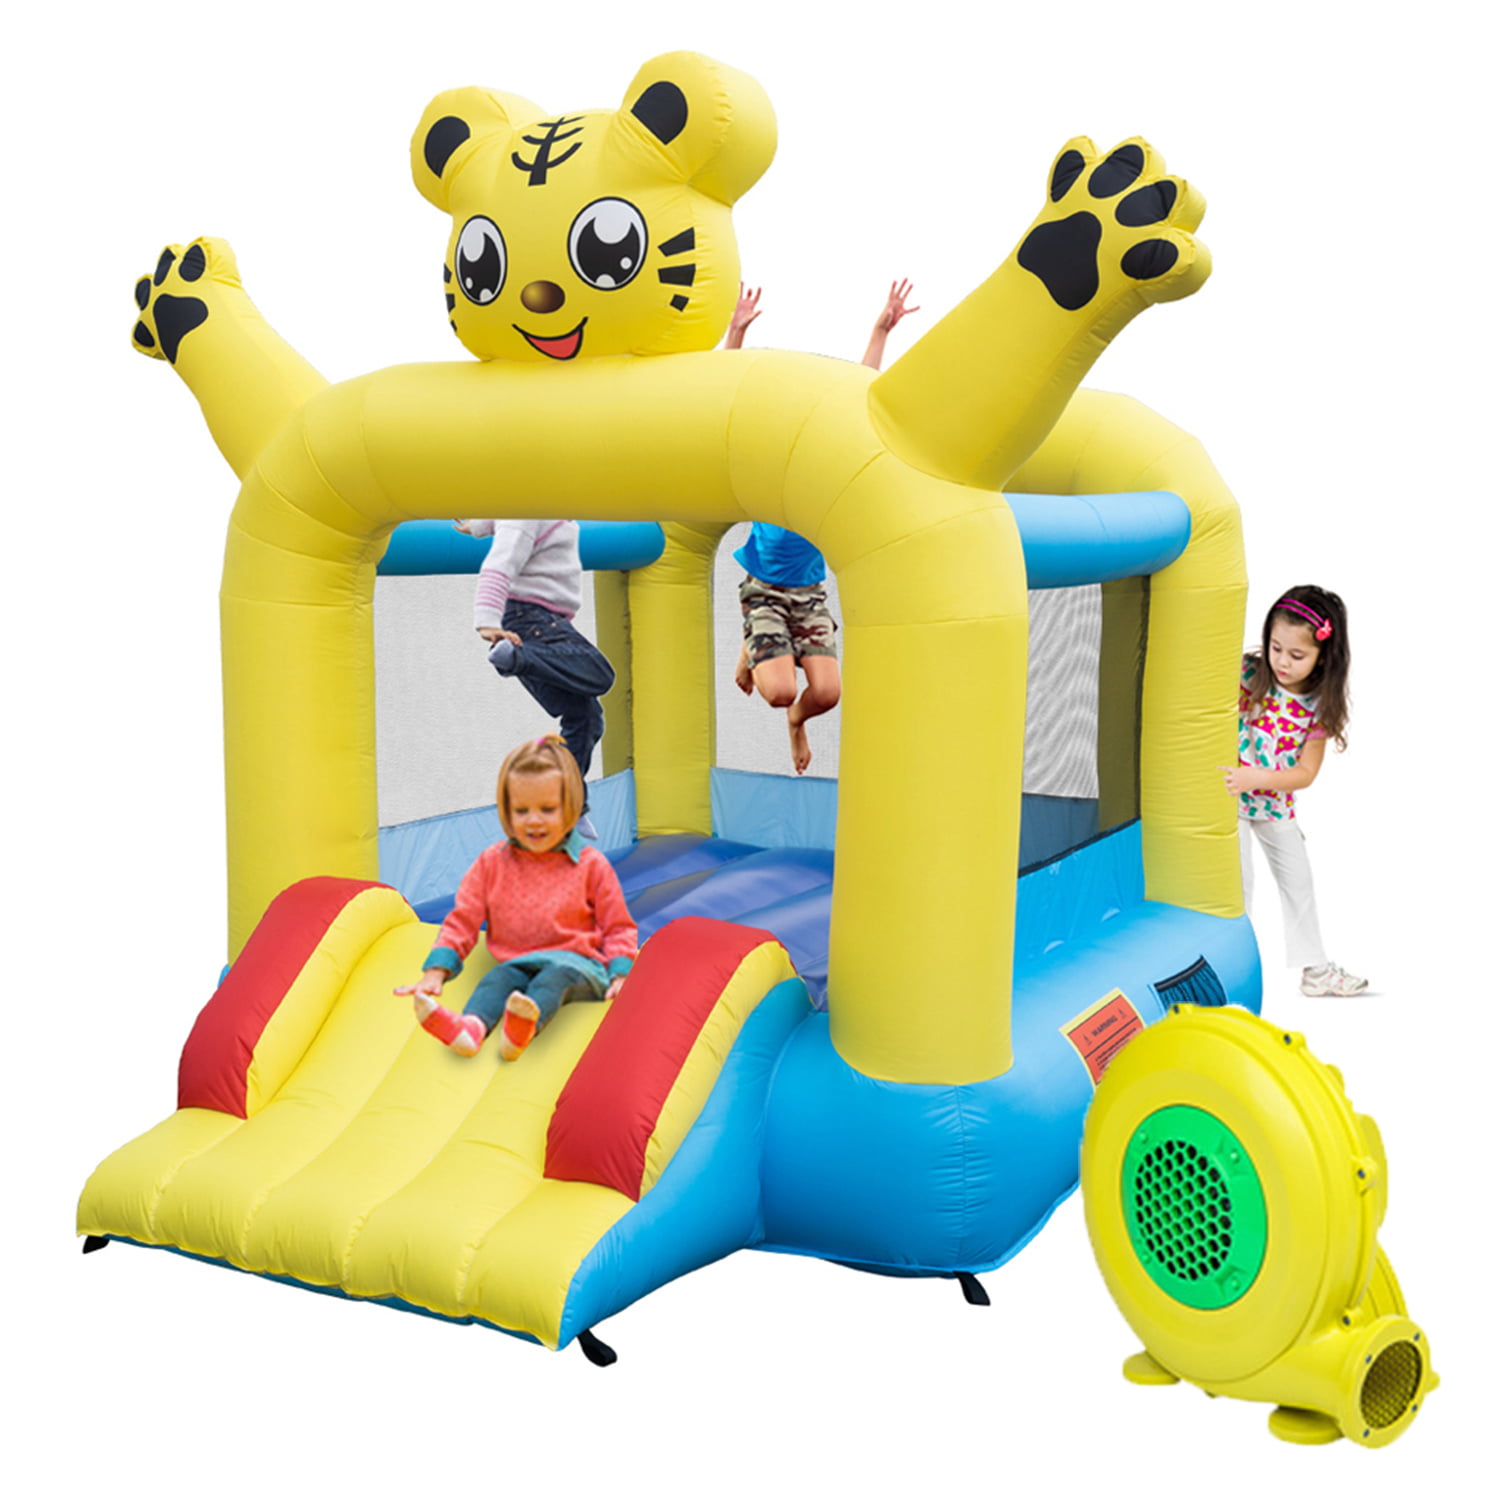 Details about   Inflatable Castle Bounce House Kids Slide Fun Jumping Playhouse with Air Blower 